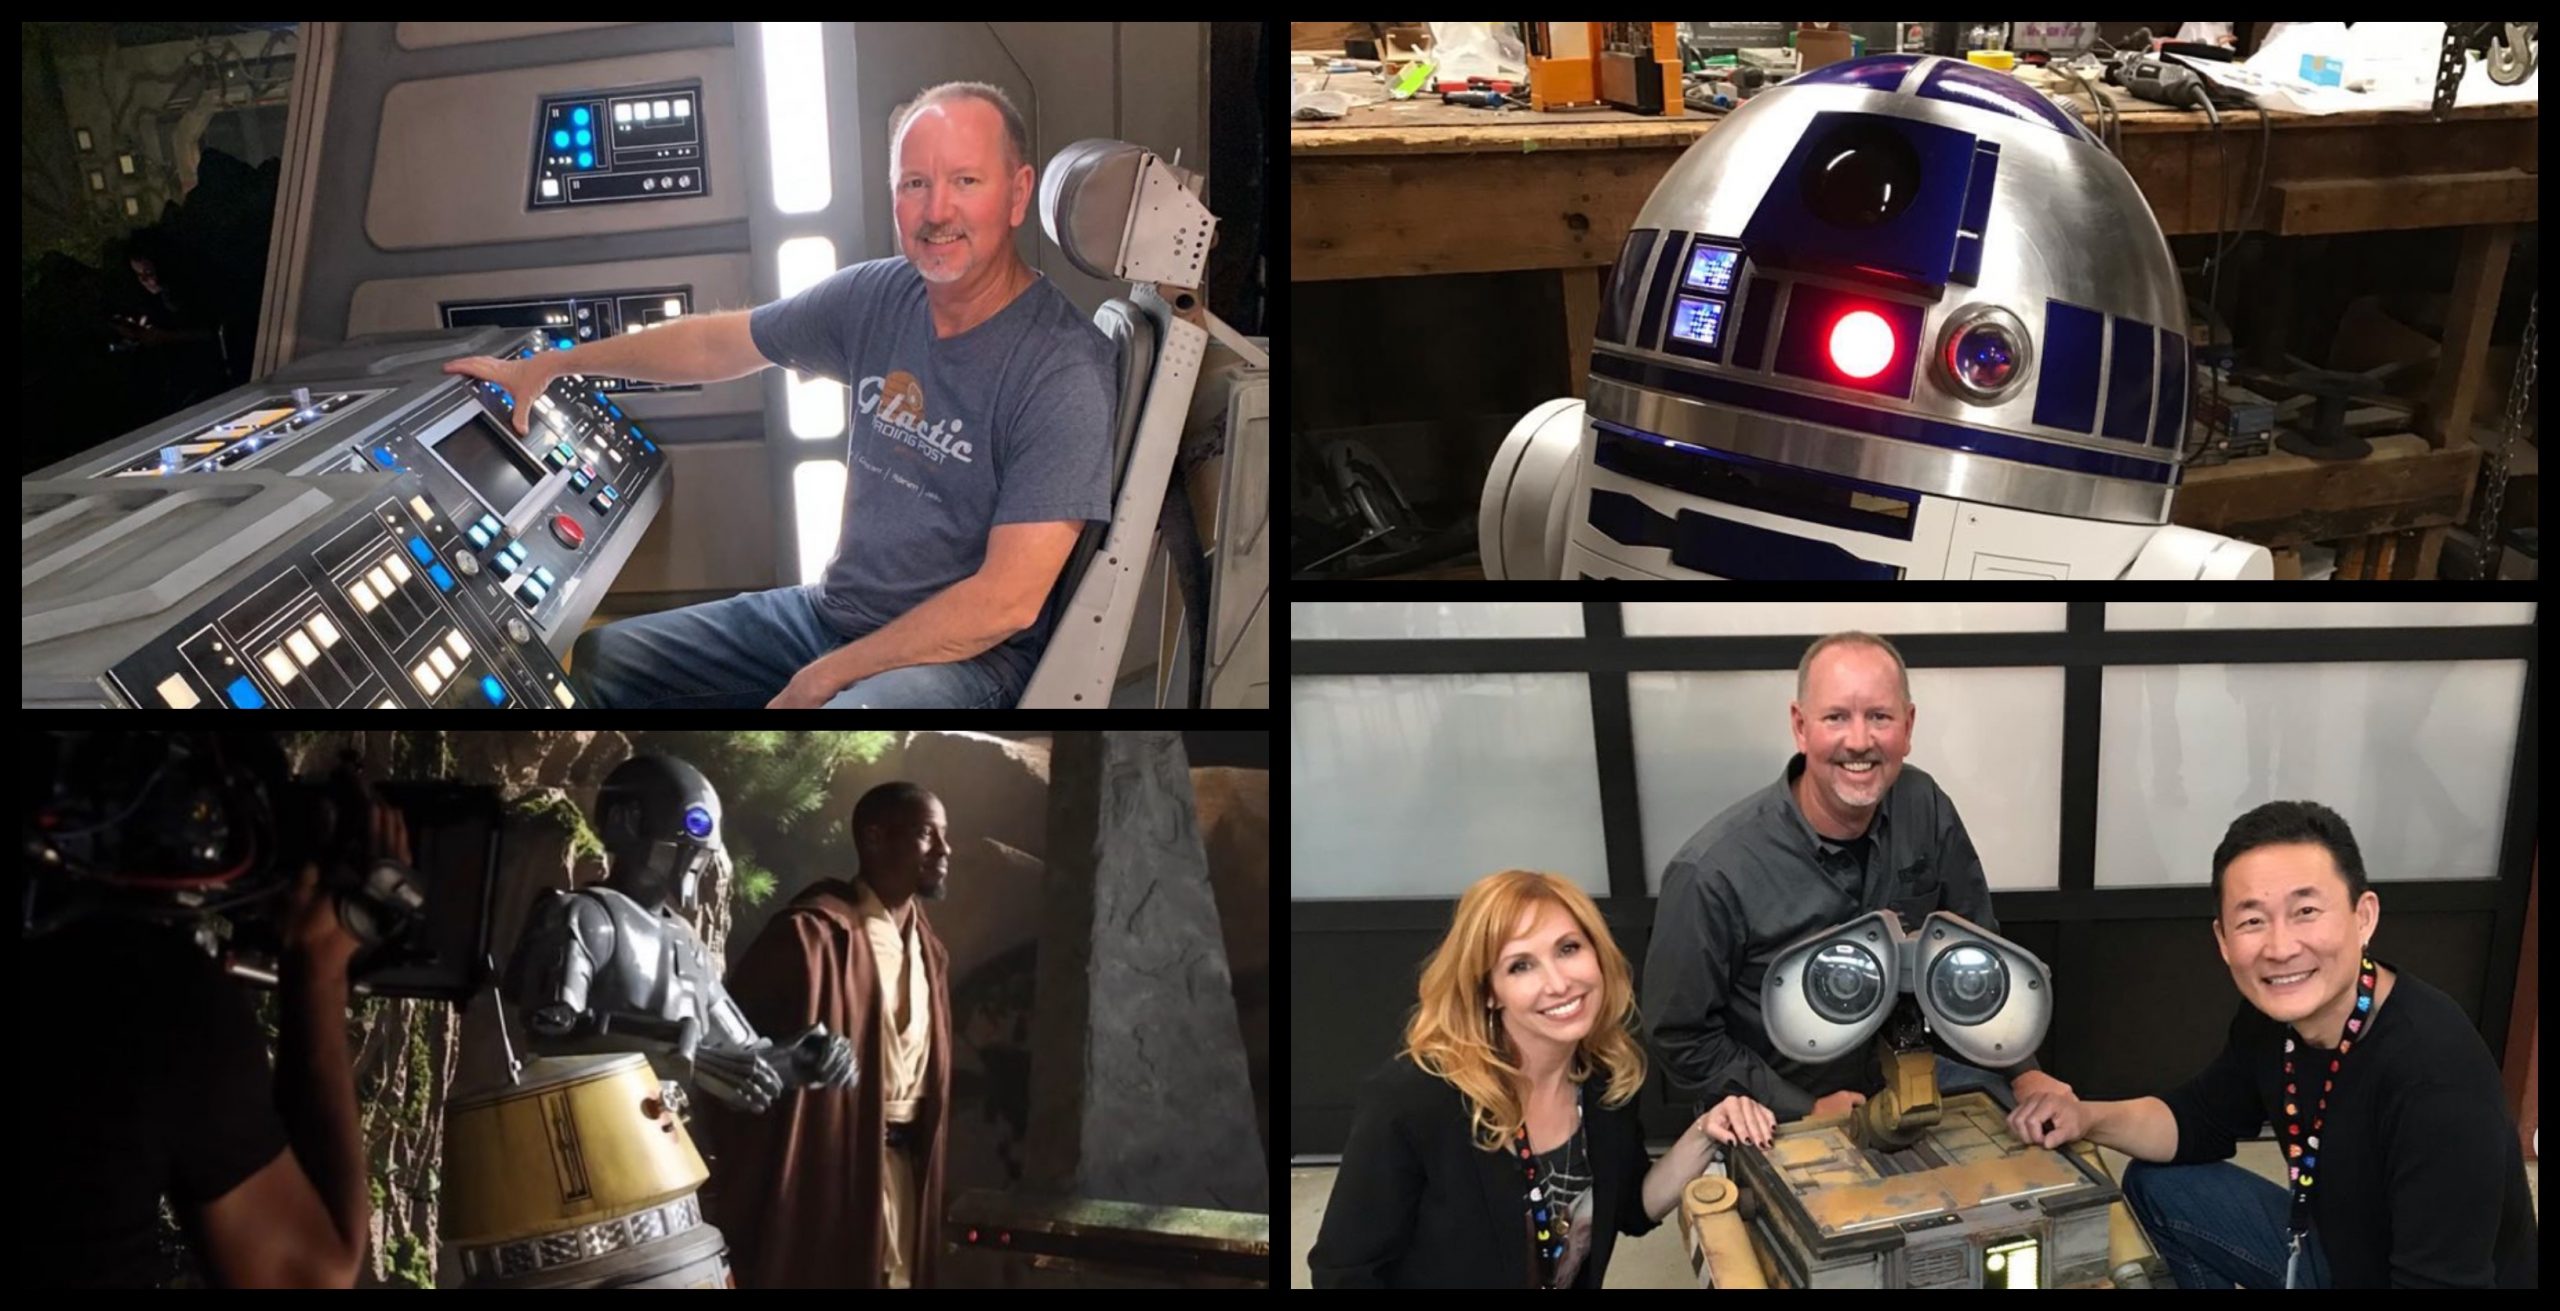 South California Farmer Becomes Roboticist for Disney and Star Wars